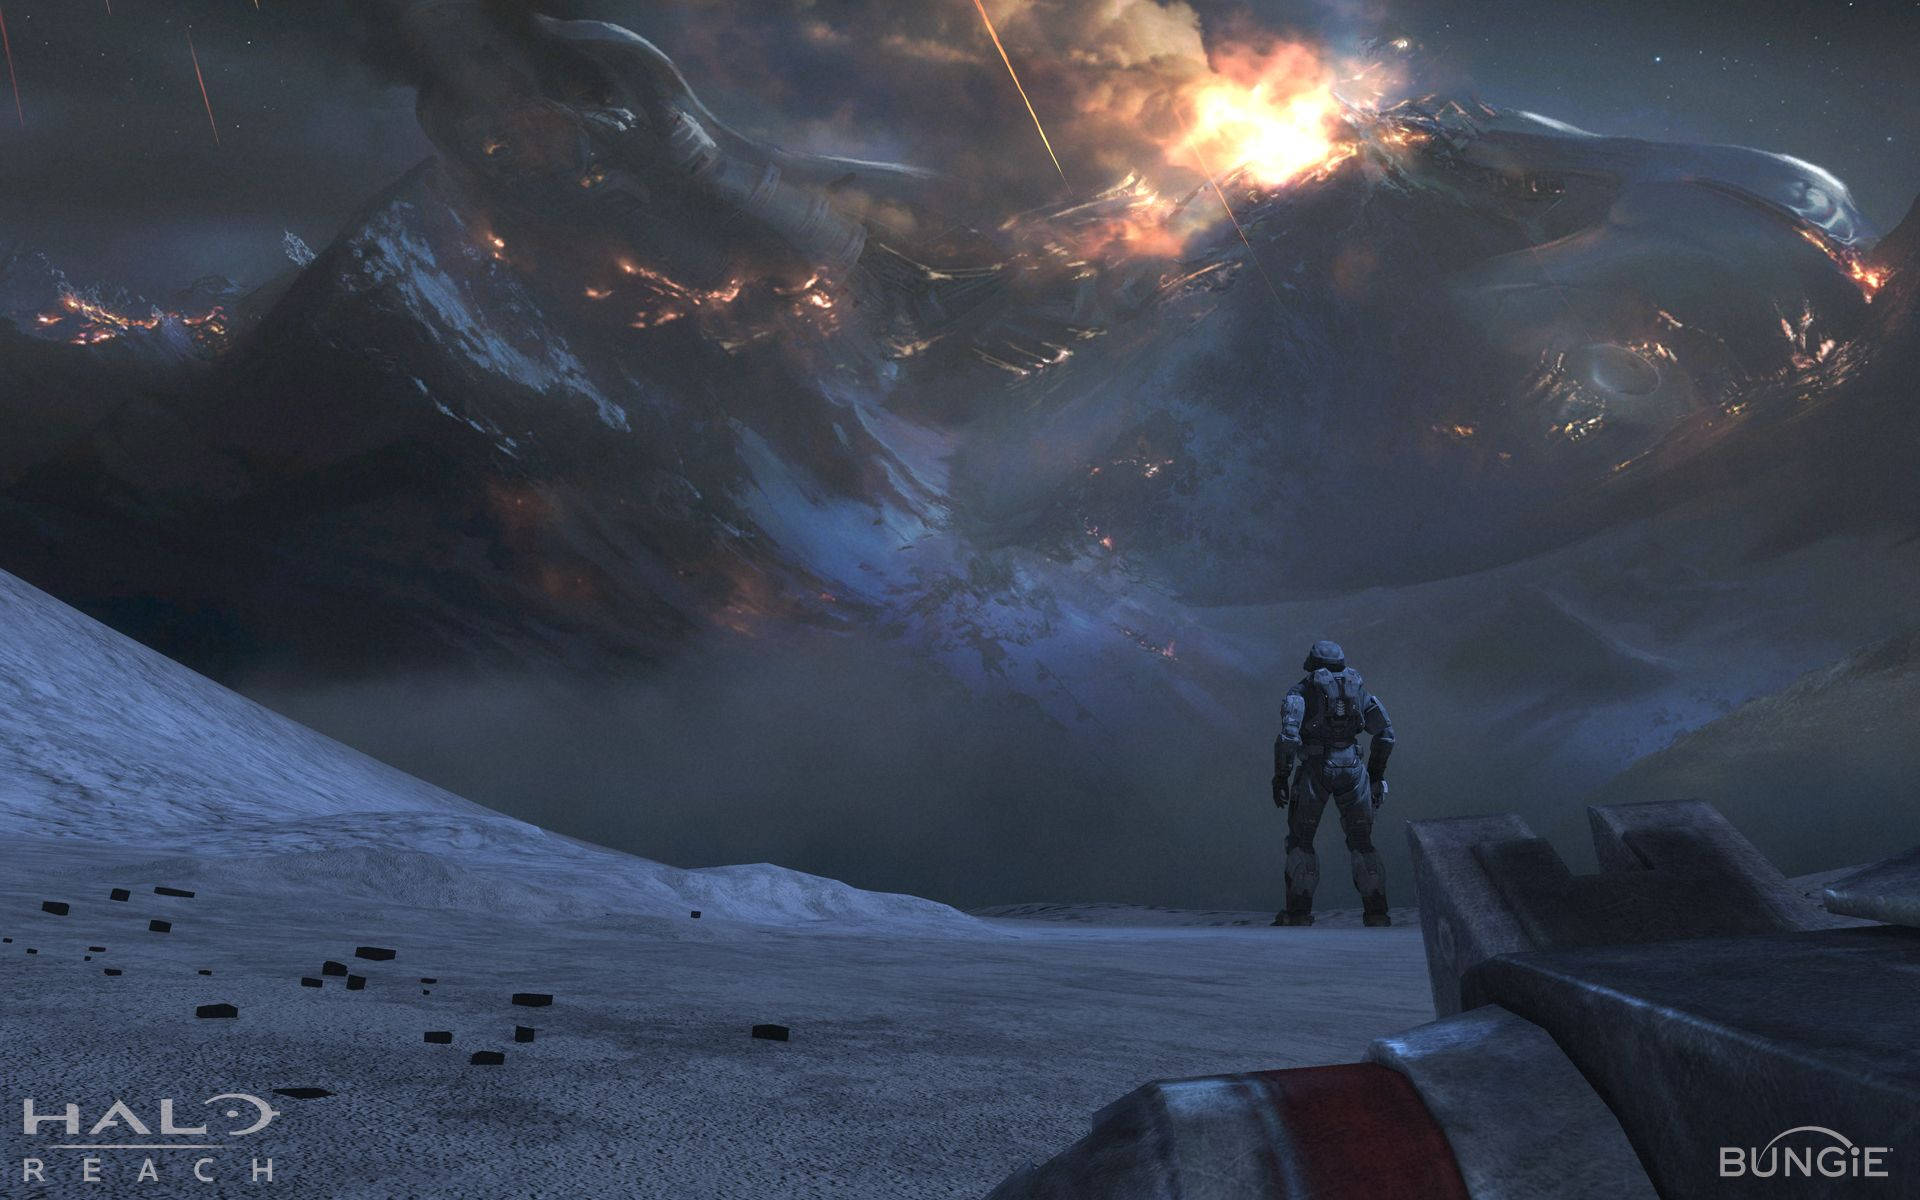 "Welcome to the world of Halo Reach" Wallpaper